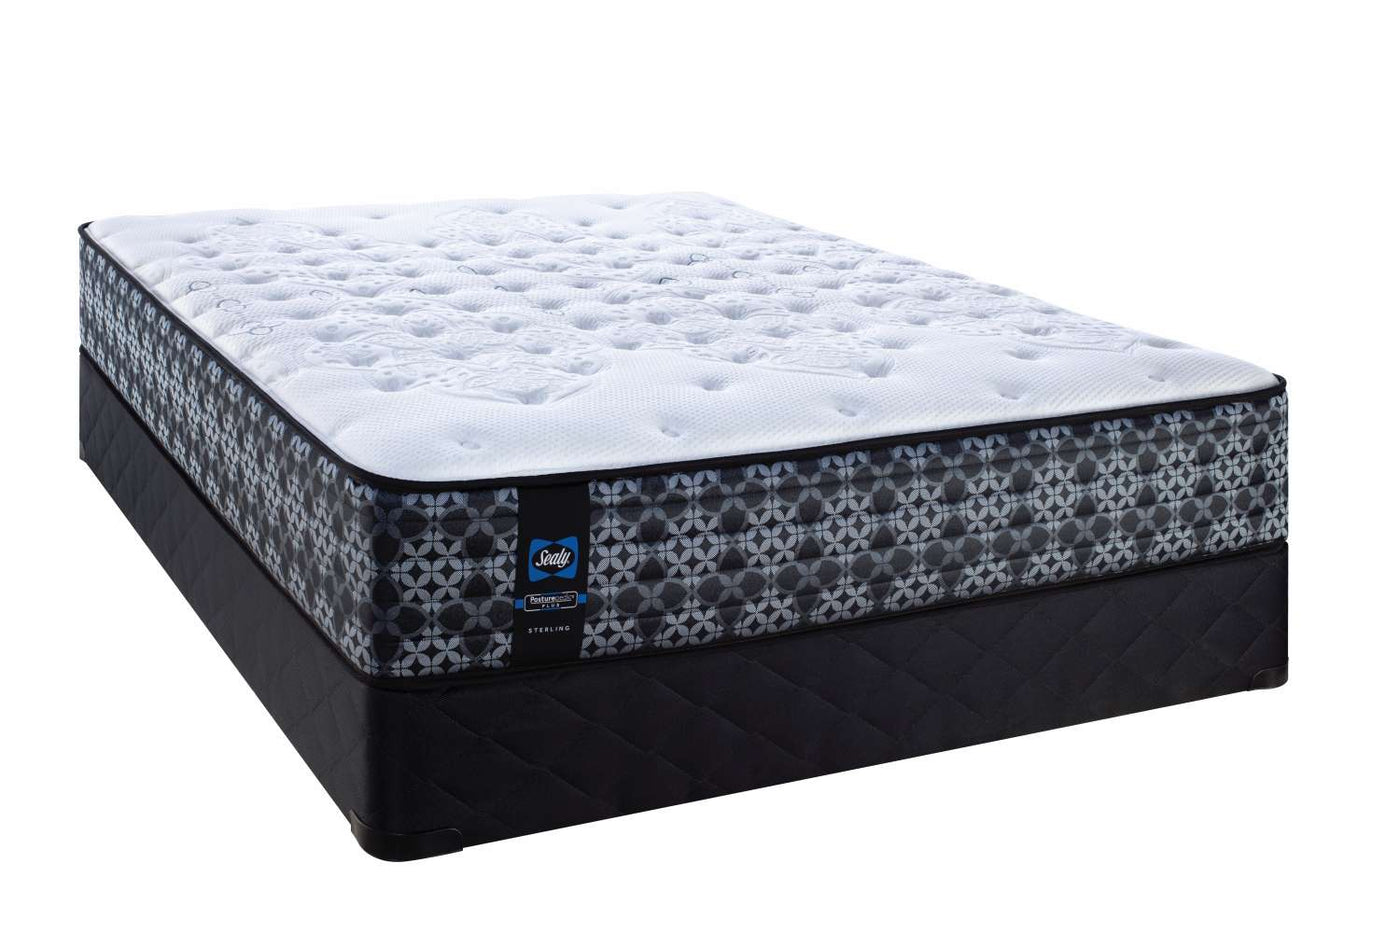 Sealy Posturepedic® Plus Sterling Series - Callie Firm King Mattress and Split Boxspring Set